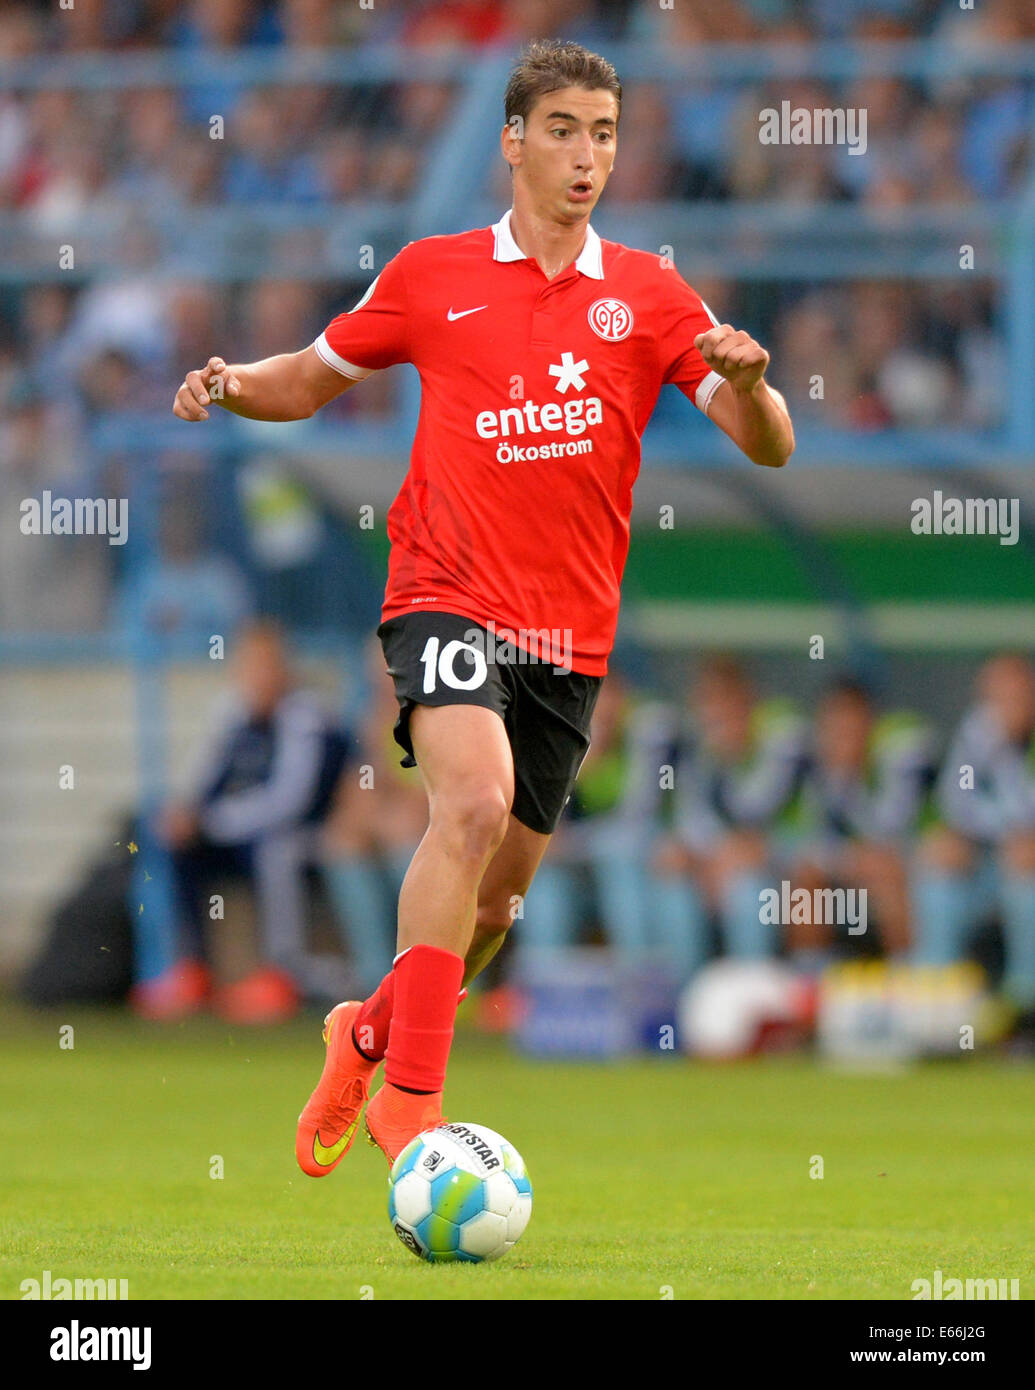 Chemnitz, Germany. 15th Aug, 2014. Mainz's Filip Djuricic in action during the DFB Cup first round match between Chemnitzer FC and FSV Mainz 05 in the Stadium on Gellerstrasse in Chemnitz, Germany, 15 August 2014. Photo: THOMAS EISENHUTH/dpa/Alamy Live News Stock Photo